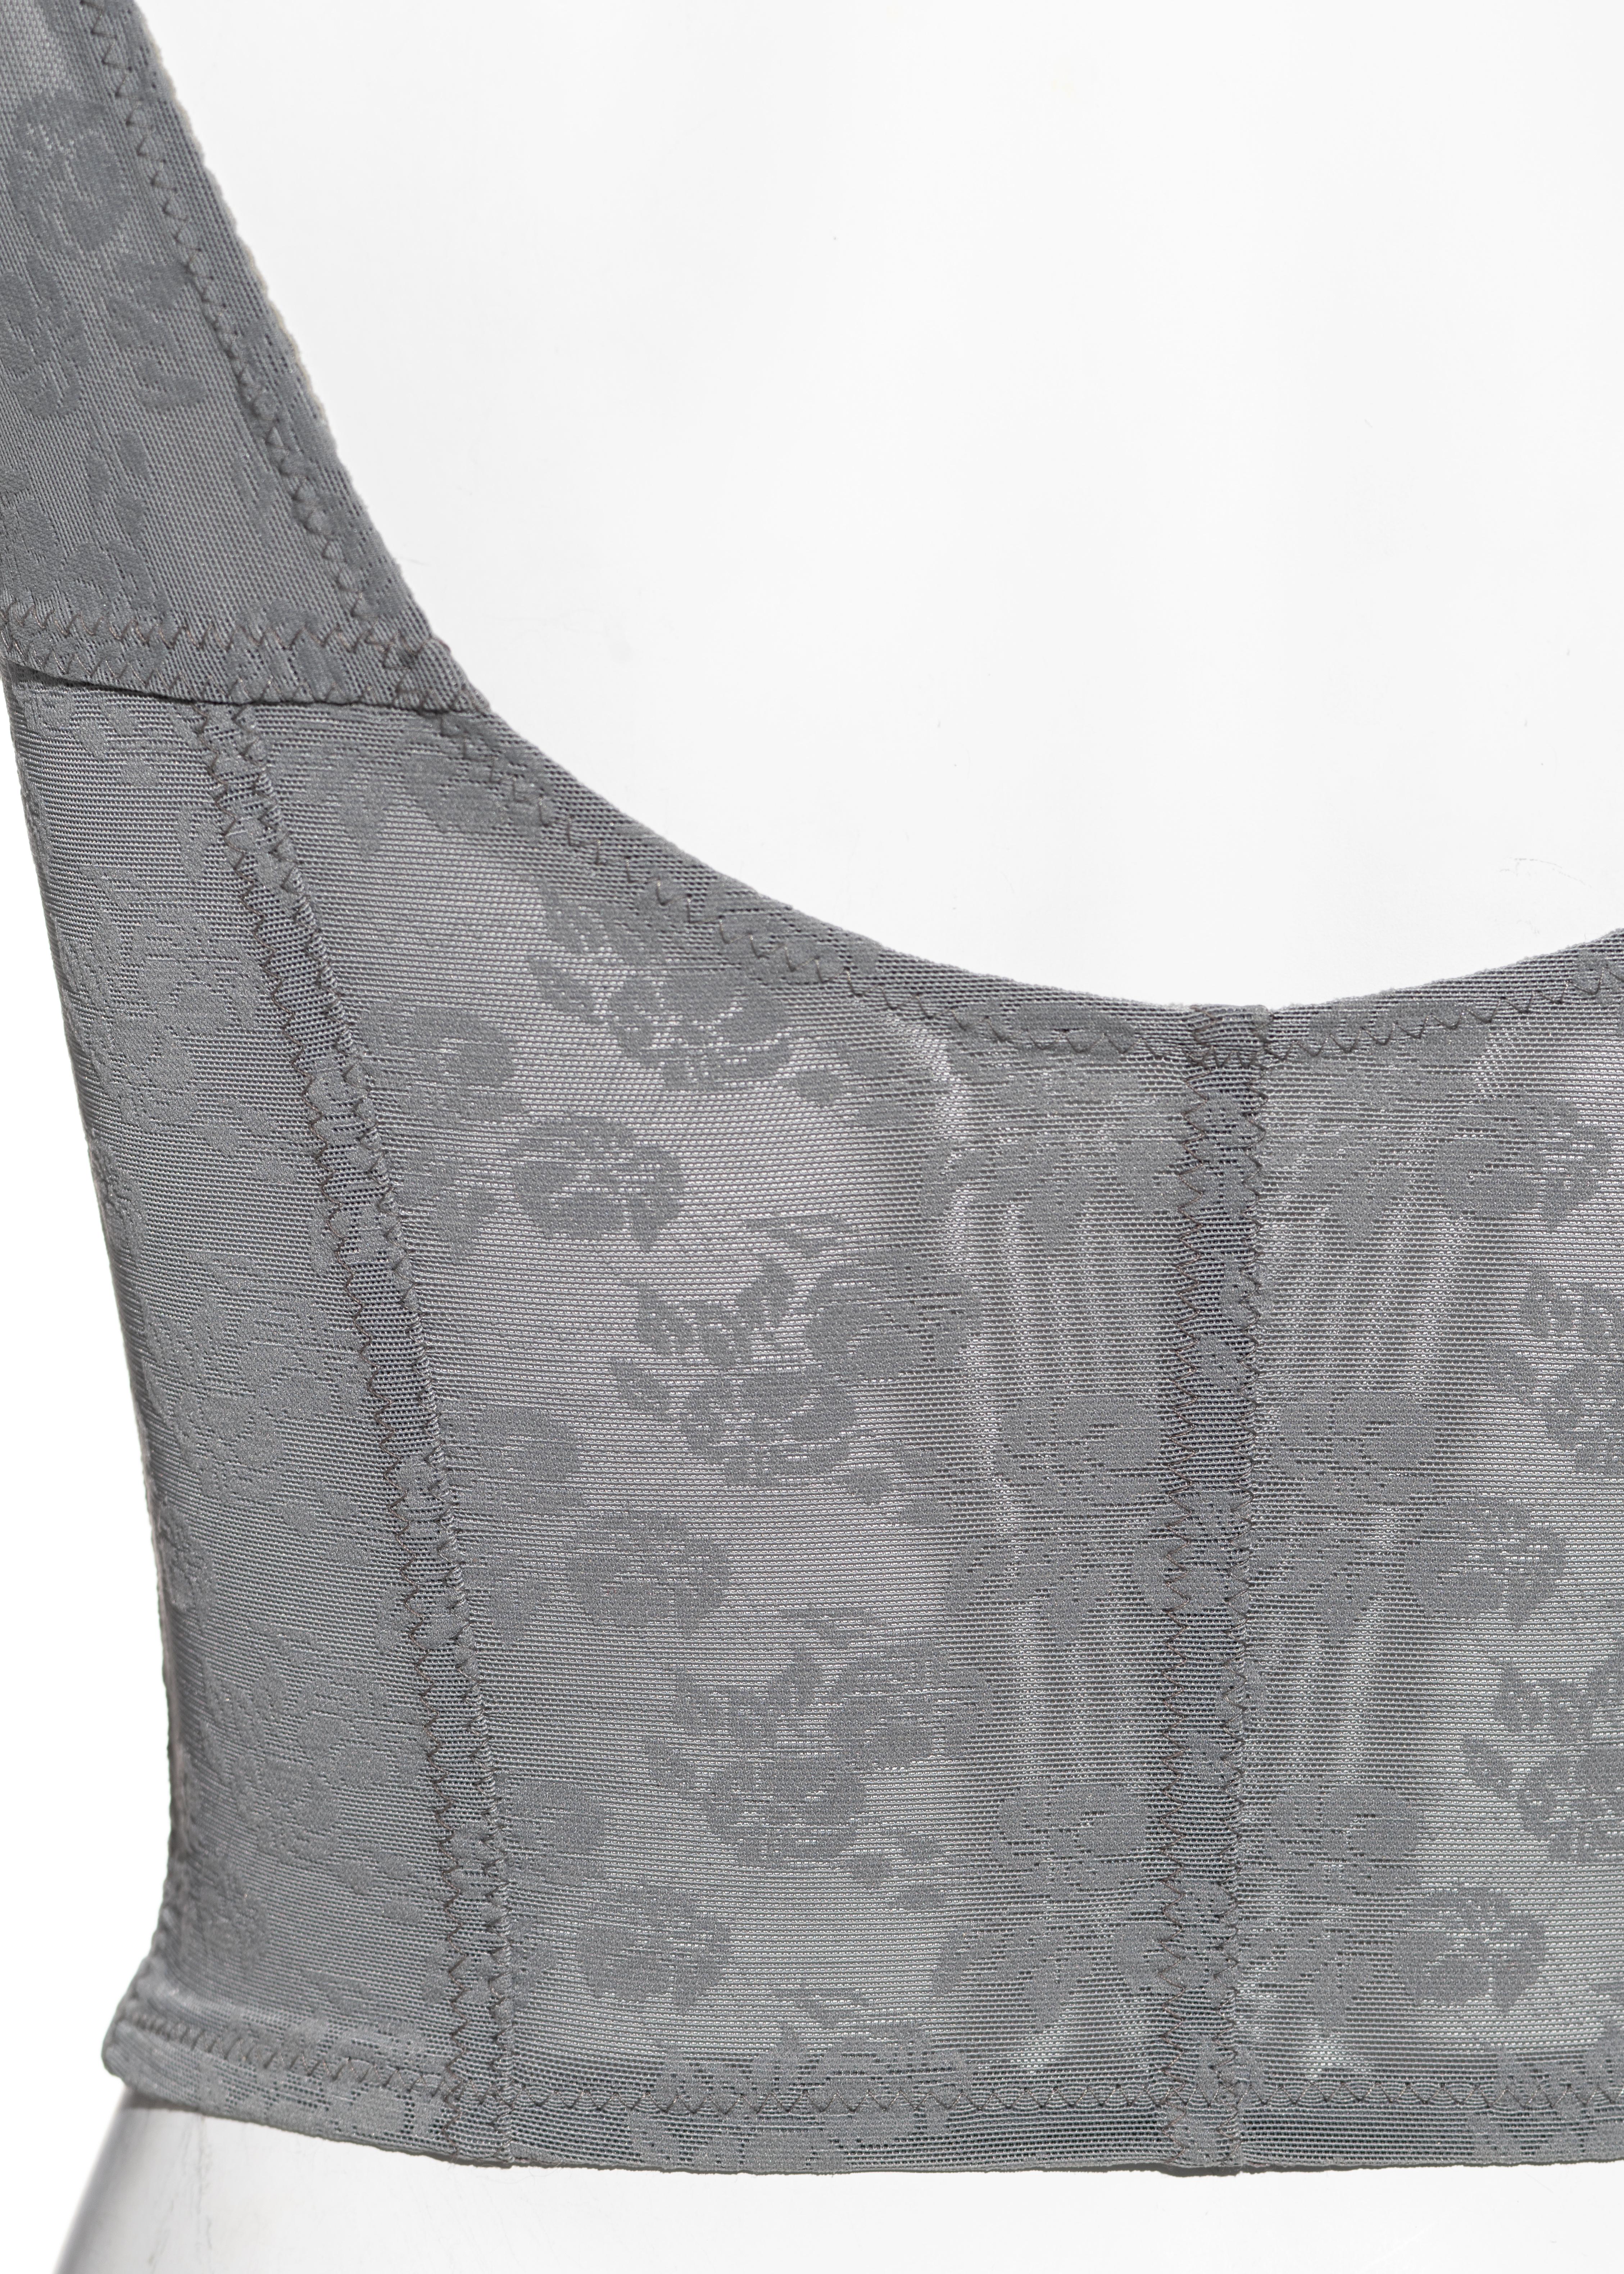 Dolce & Gabbana silver grey satin and floral lycra corset top, fw 1992 In Excellent Condition In London, GB